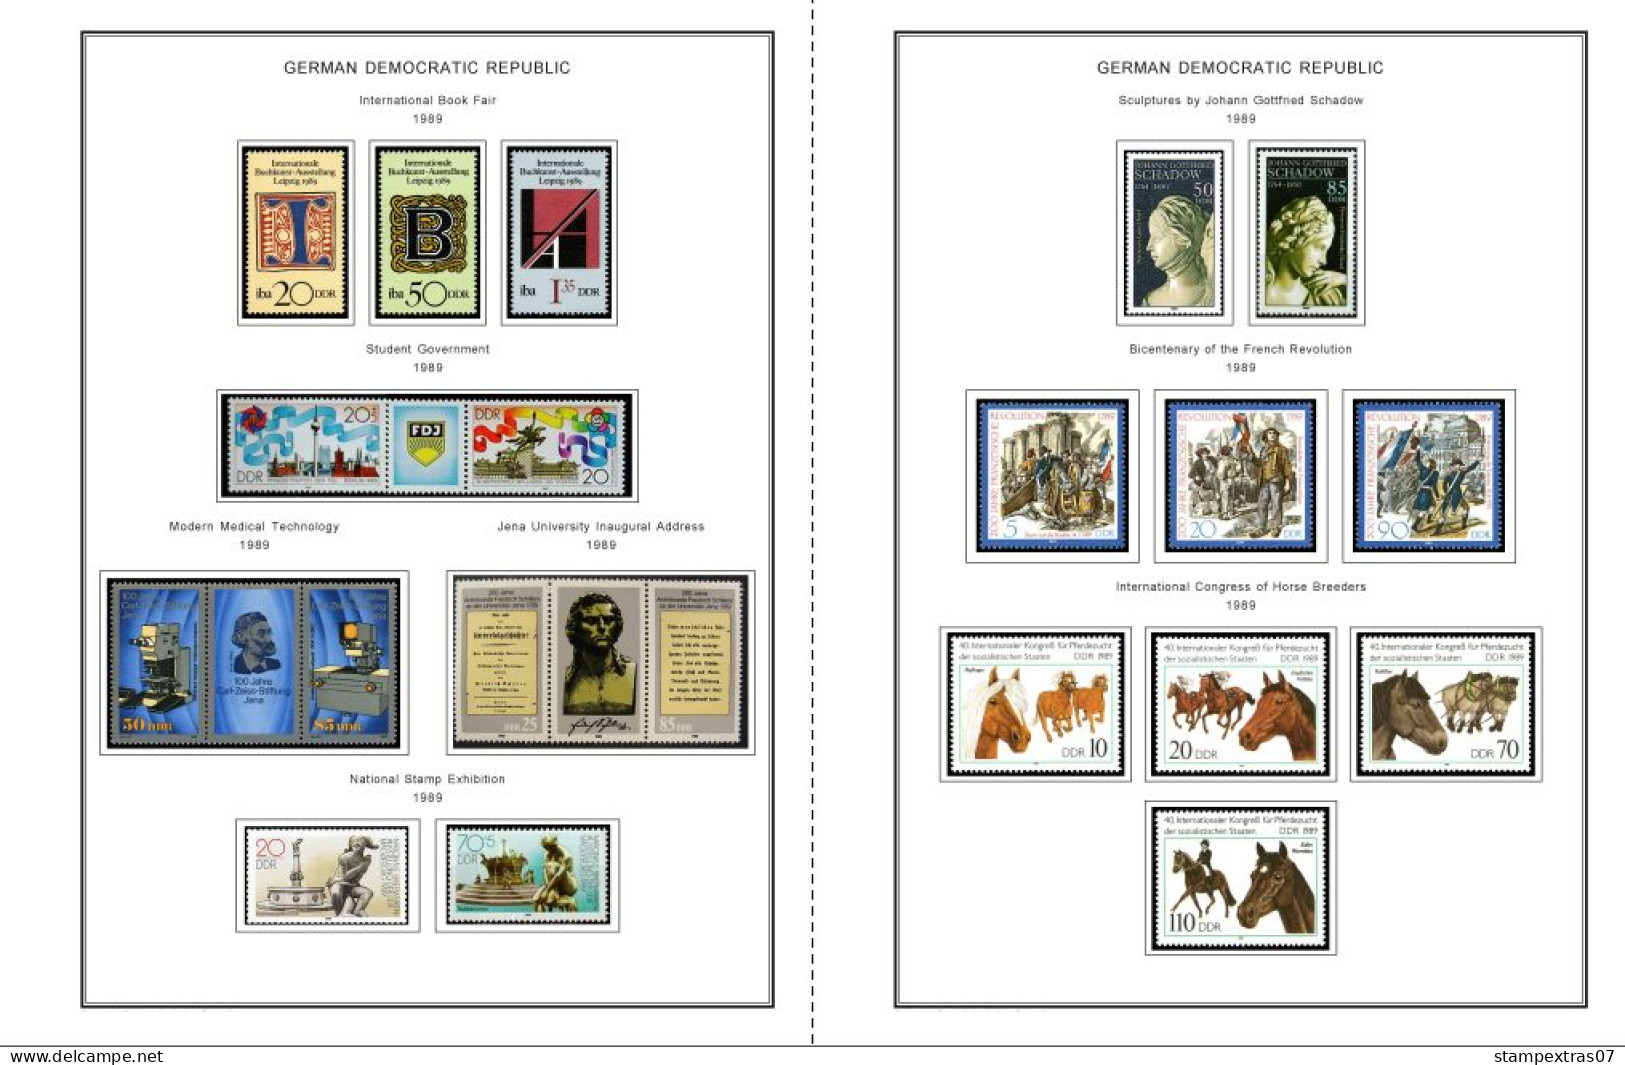 GERMANY (EAST - DDR) STAMP ALBUM PAGES 1949-1990 (334 color illustrated pages)